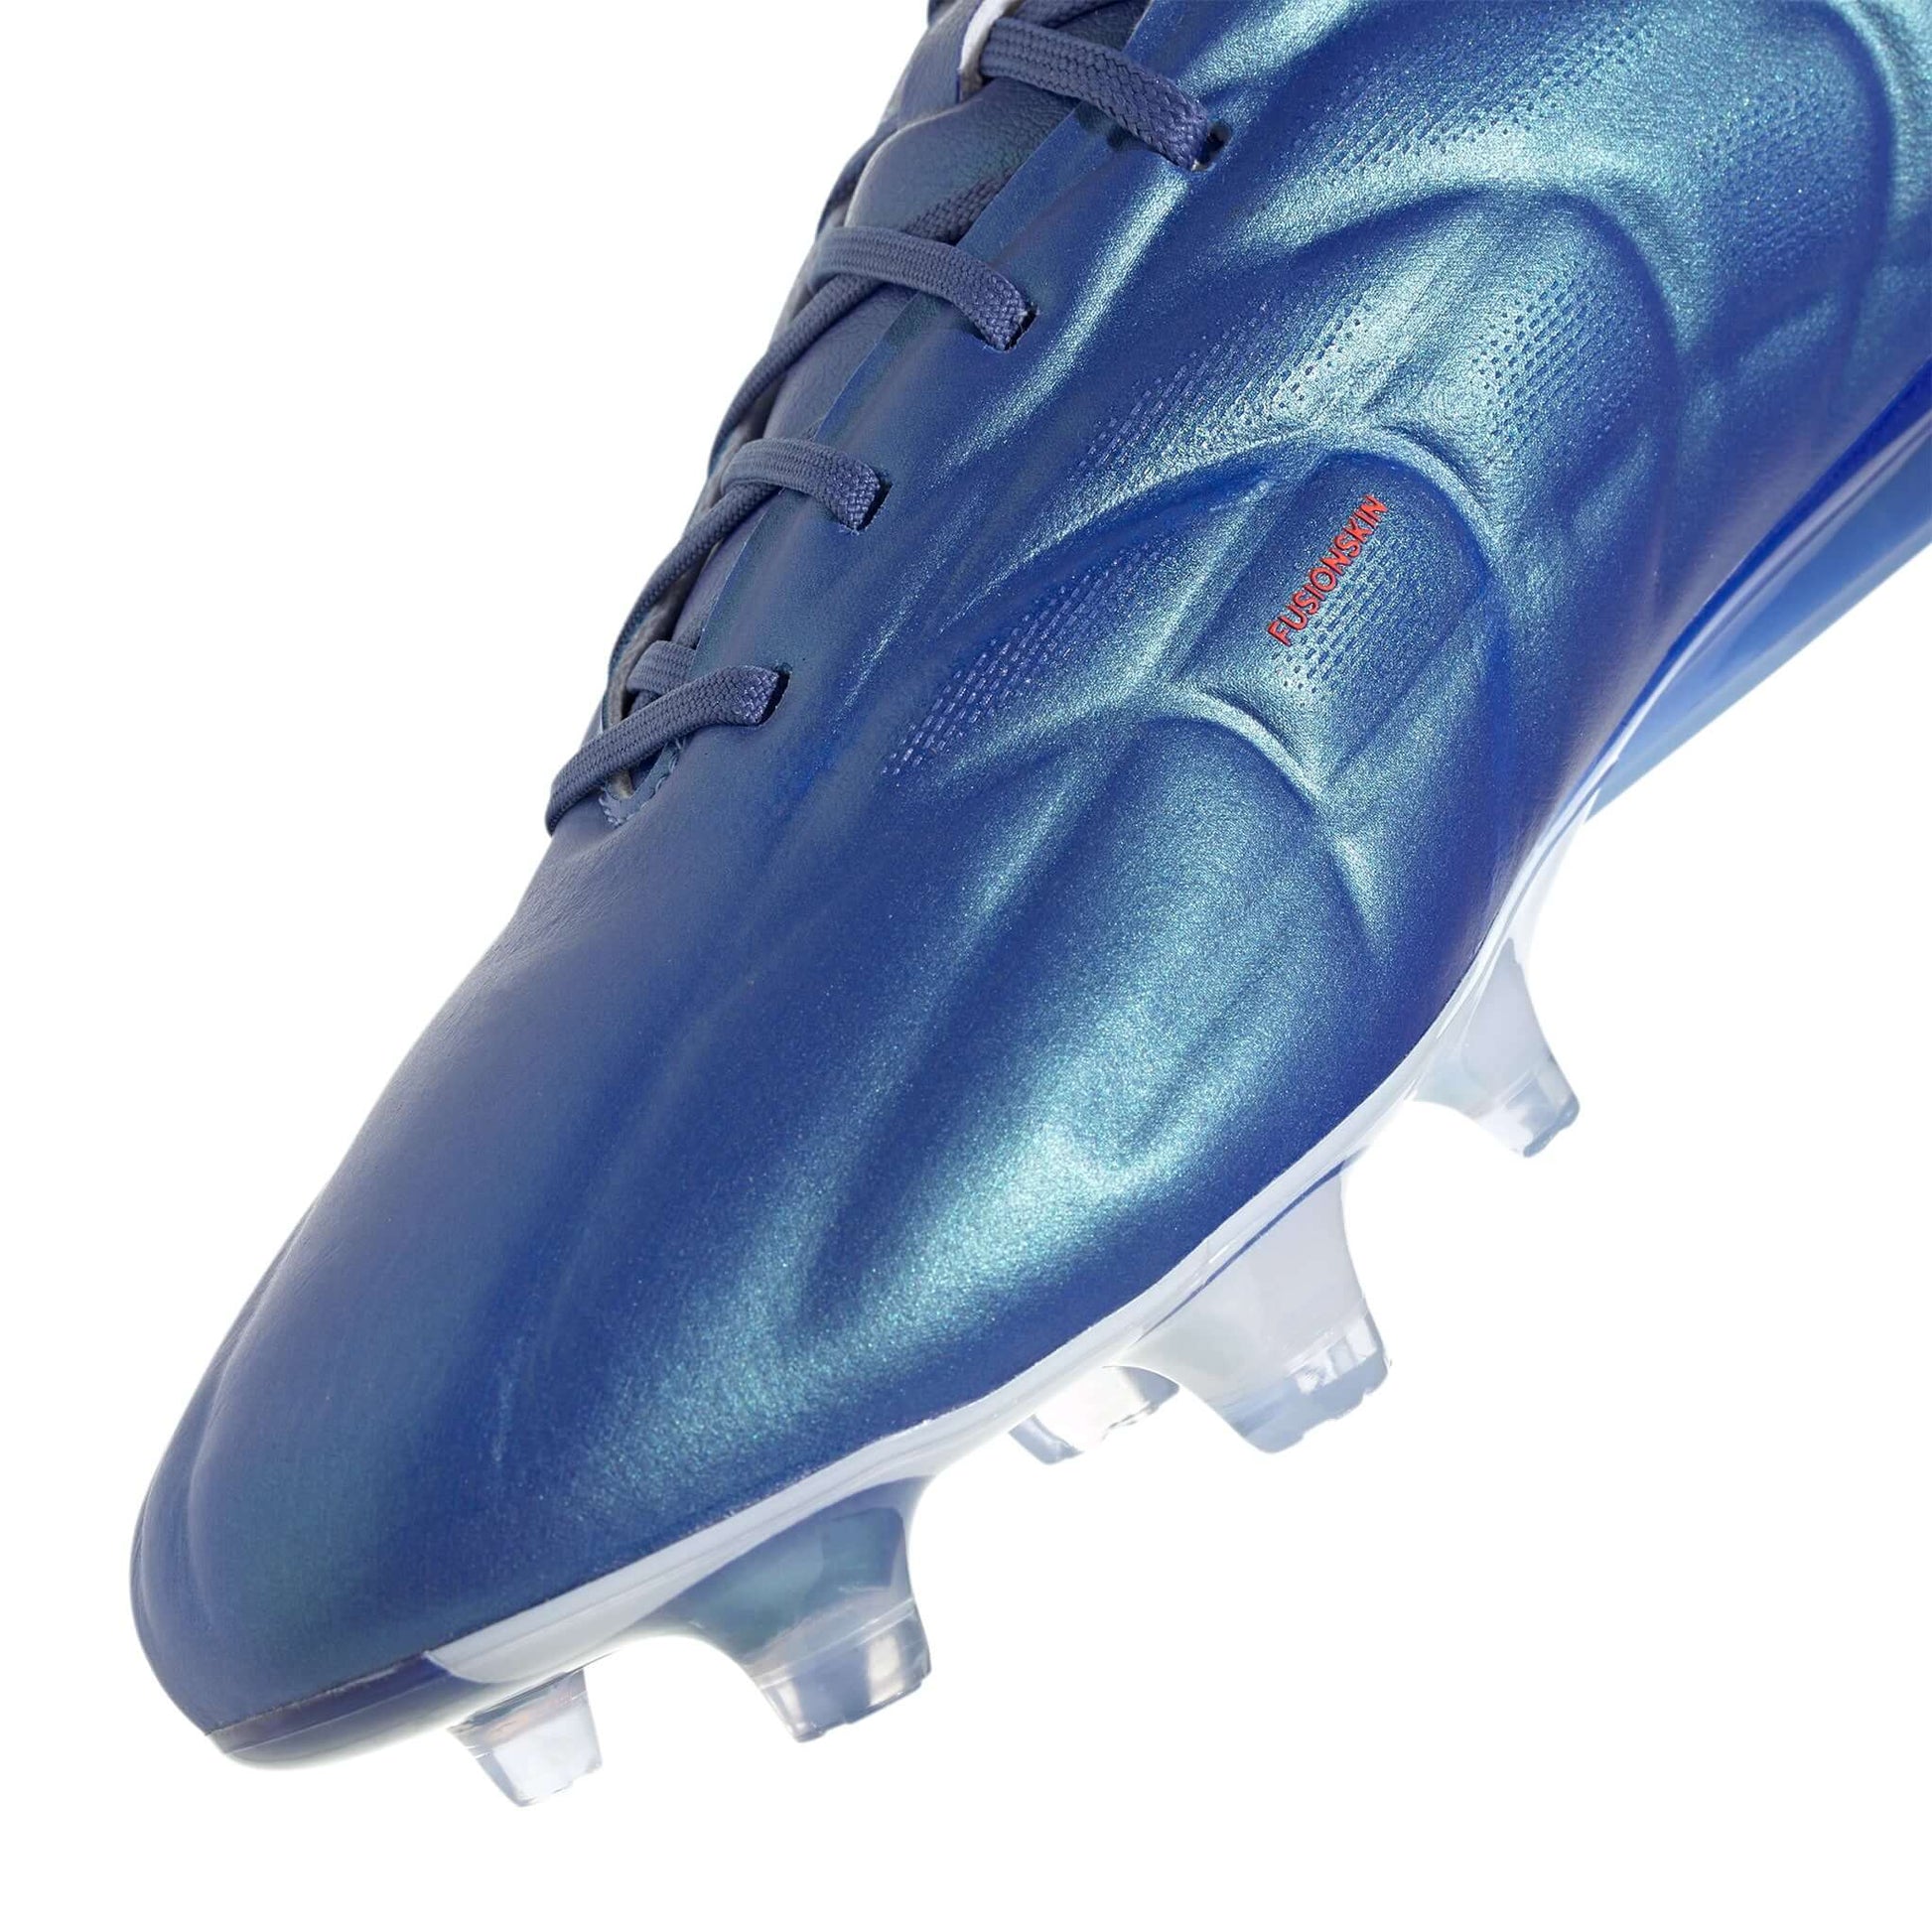 Copa Pure II.1 Firm Ground Cleats | EvangelistaSports.com | Canada's Premiere Soccer Store